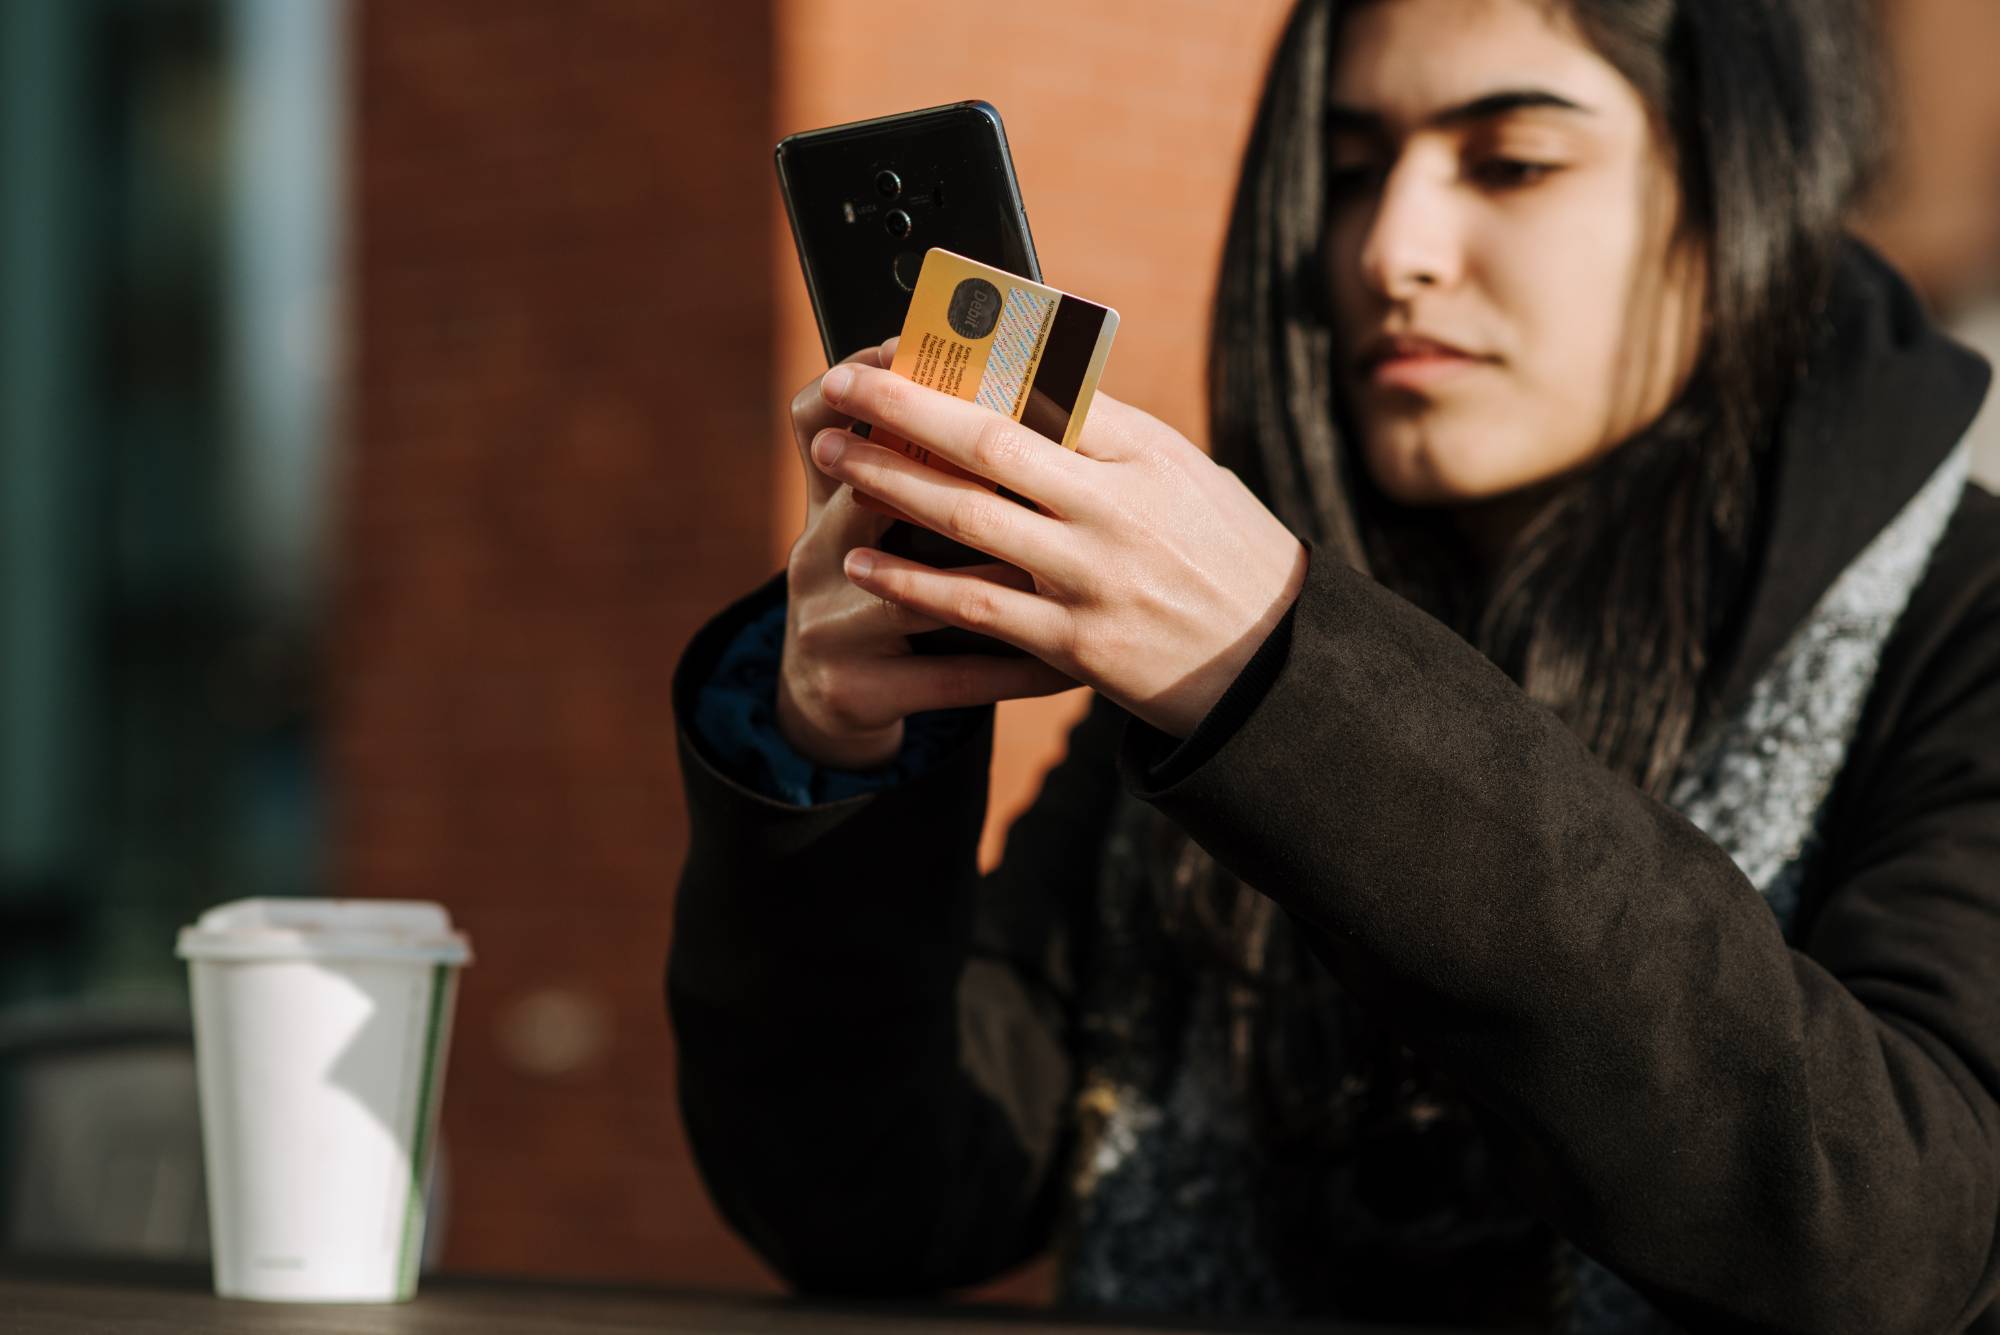 Student performing cashless transaction on mobile phone outside with coffee cup on table